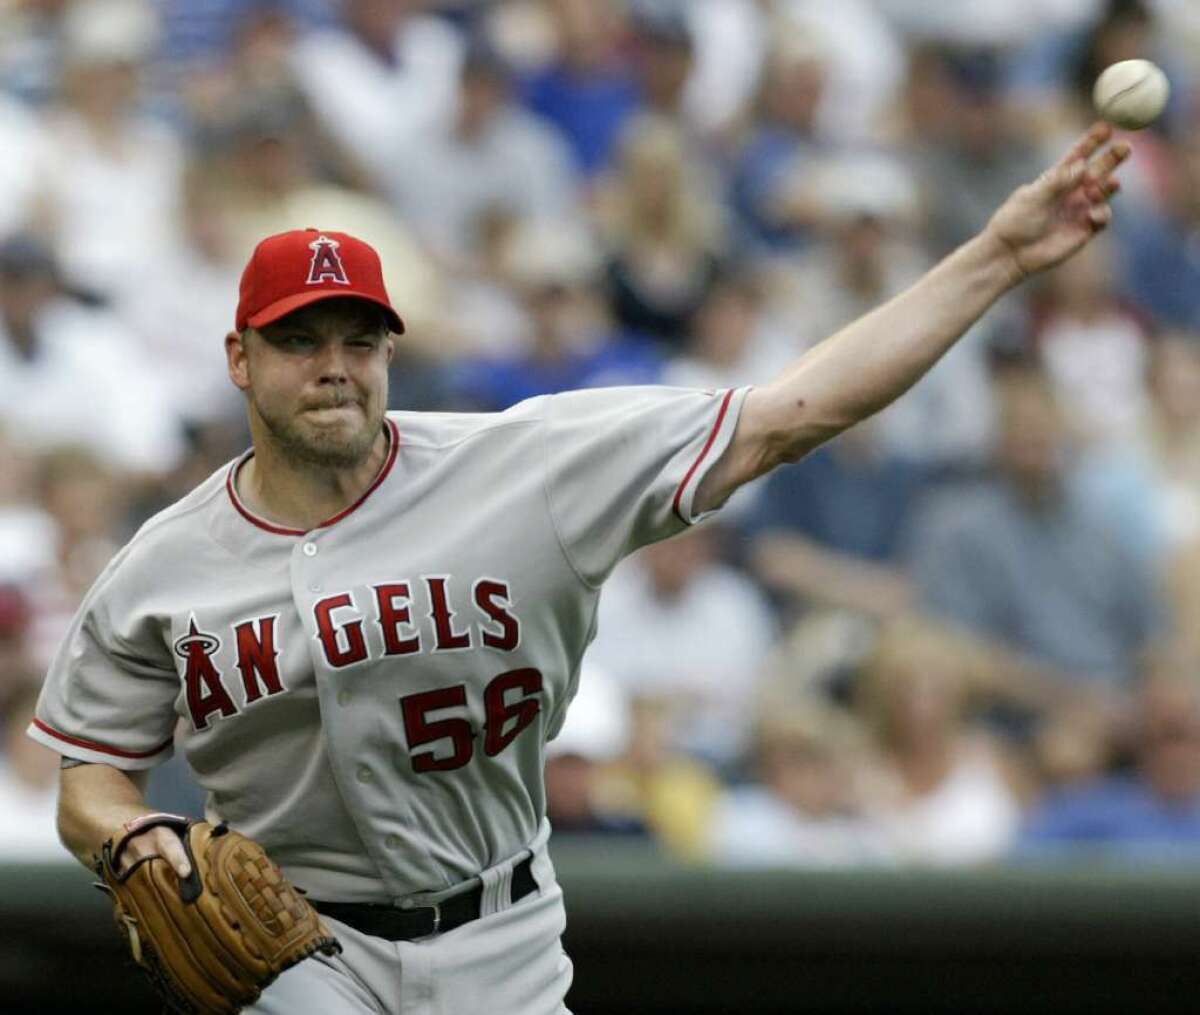 Jarrod Washburn pitched for the Angels from 1998 to 2005.